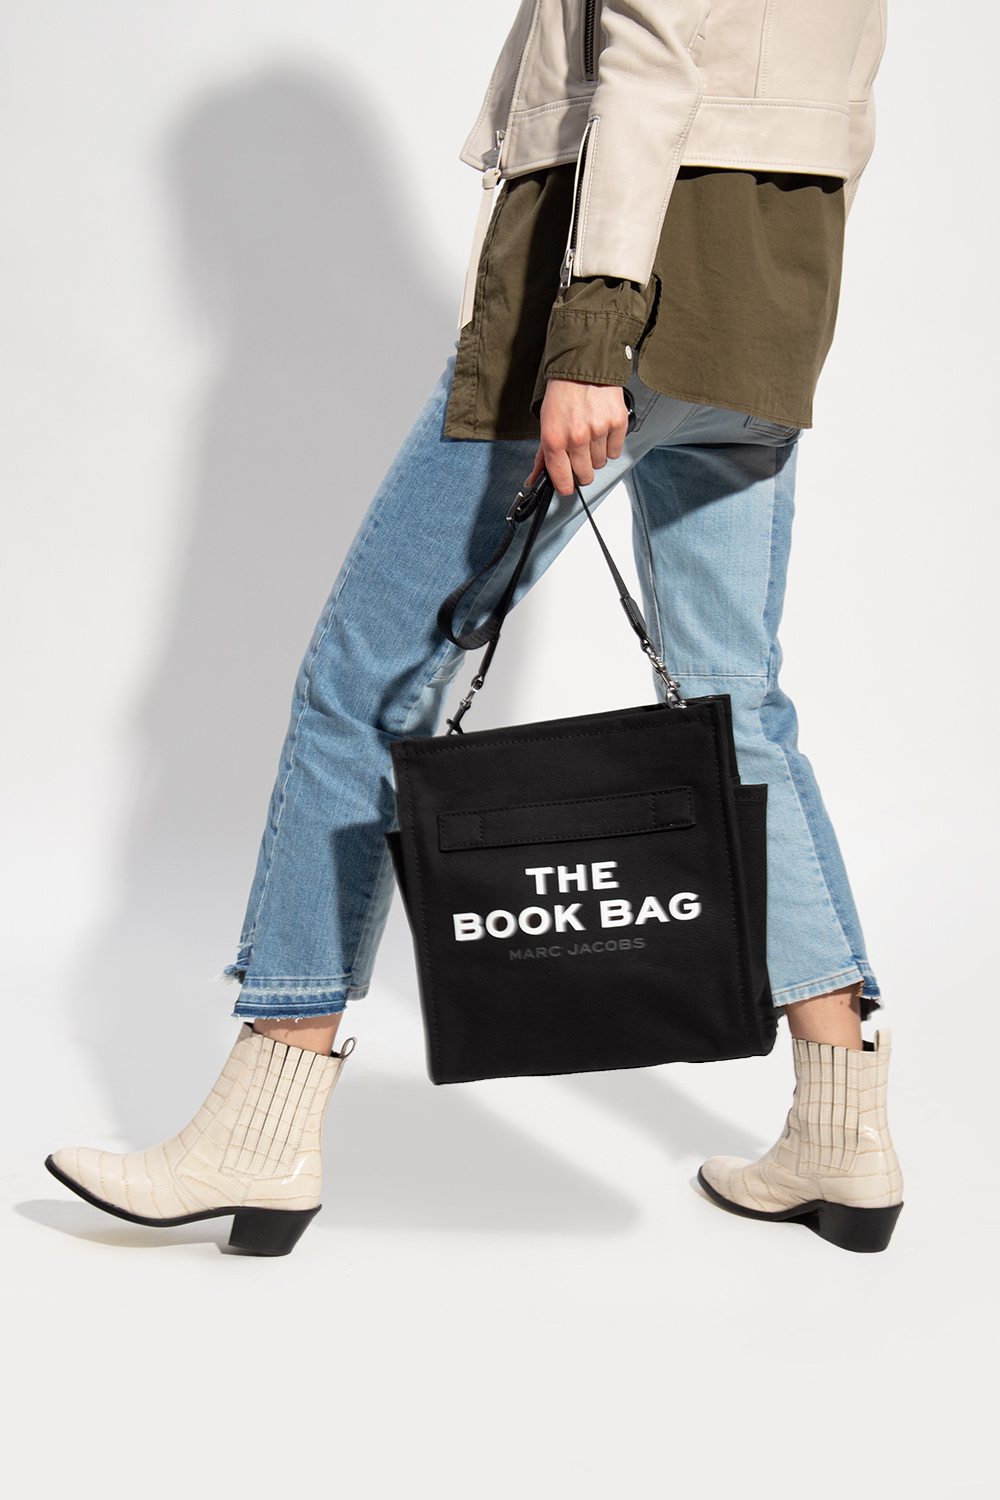 The Book Bag